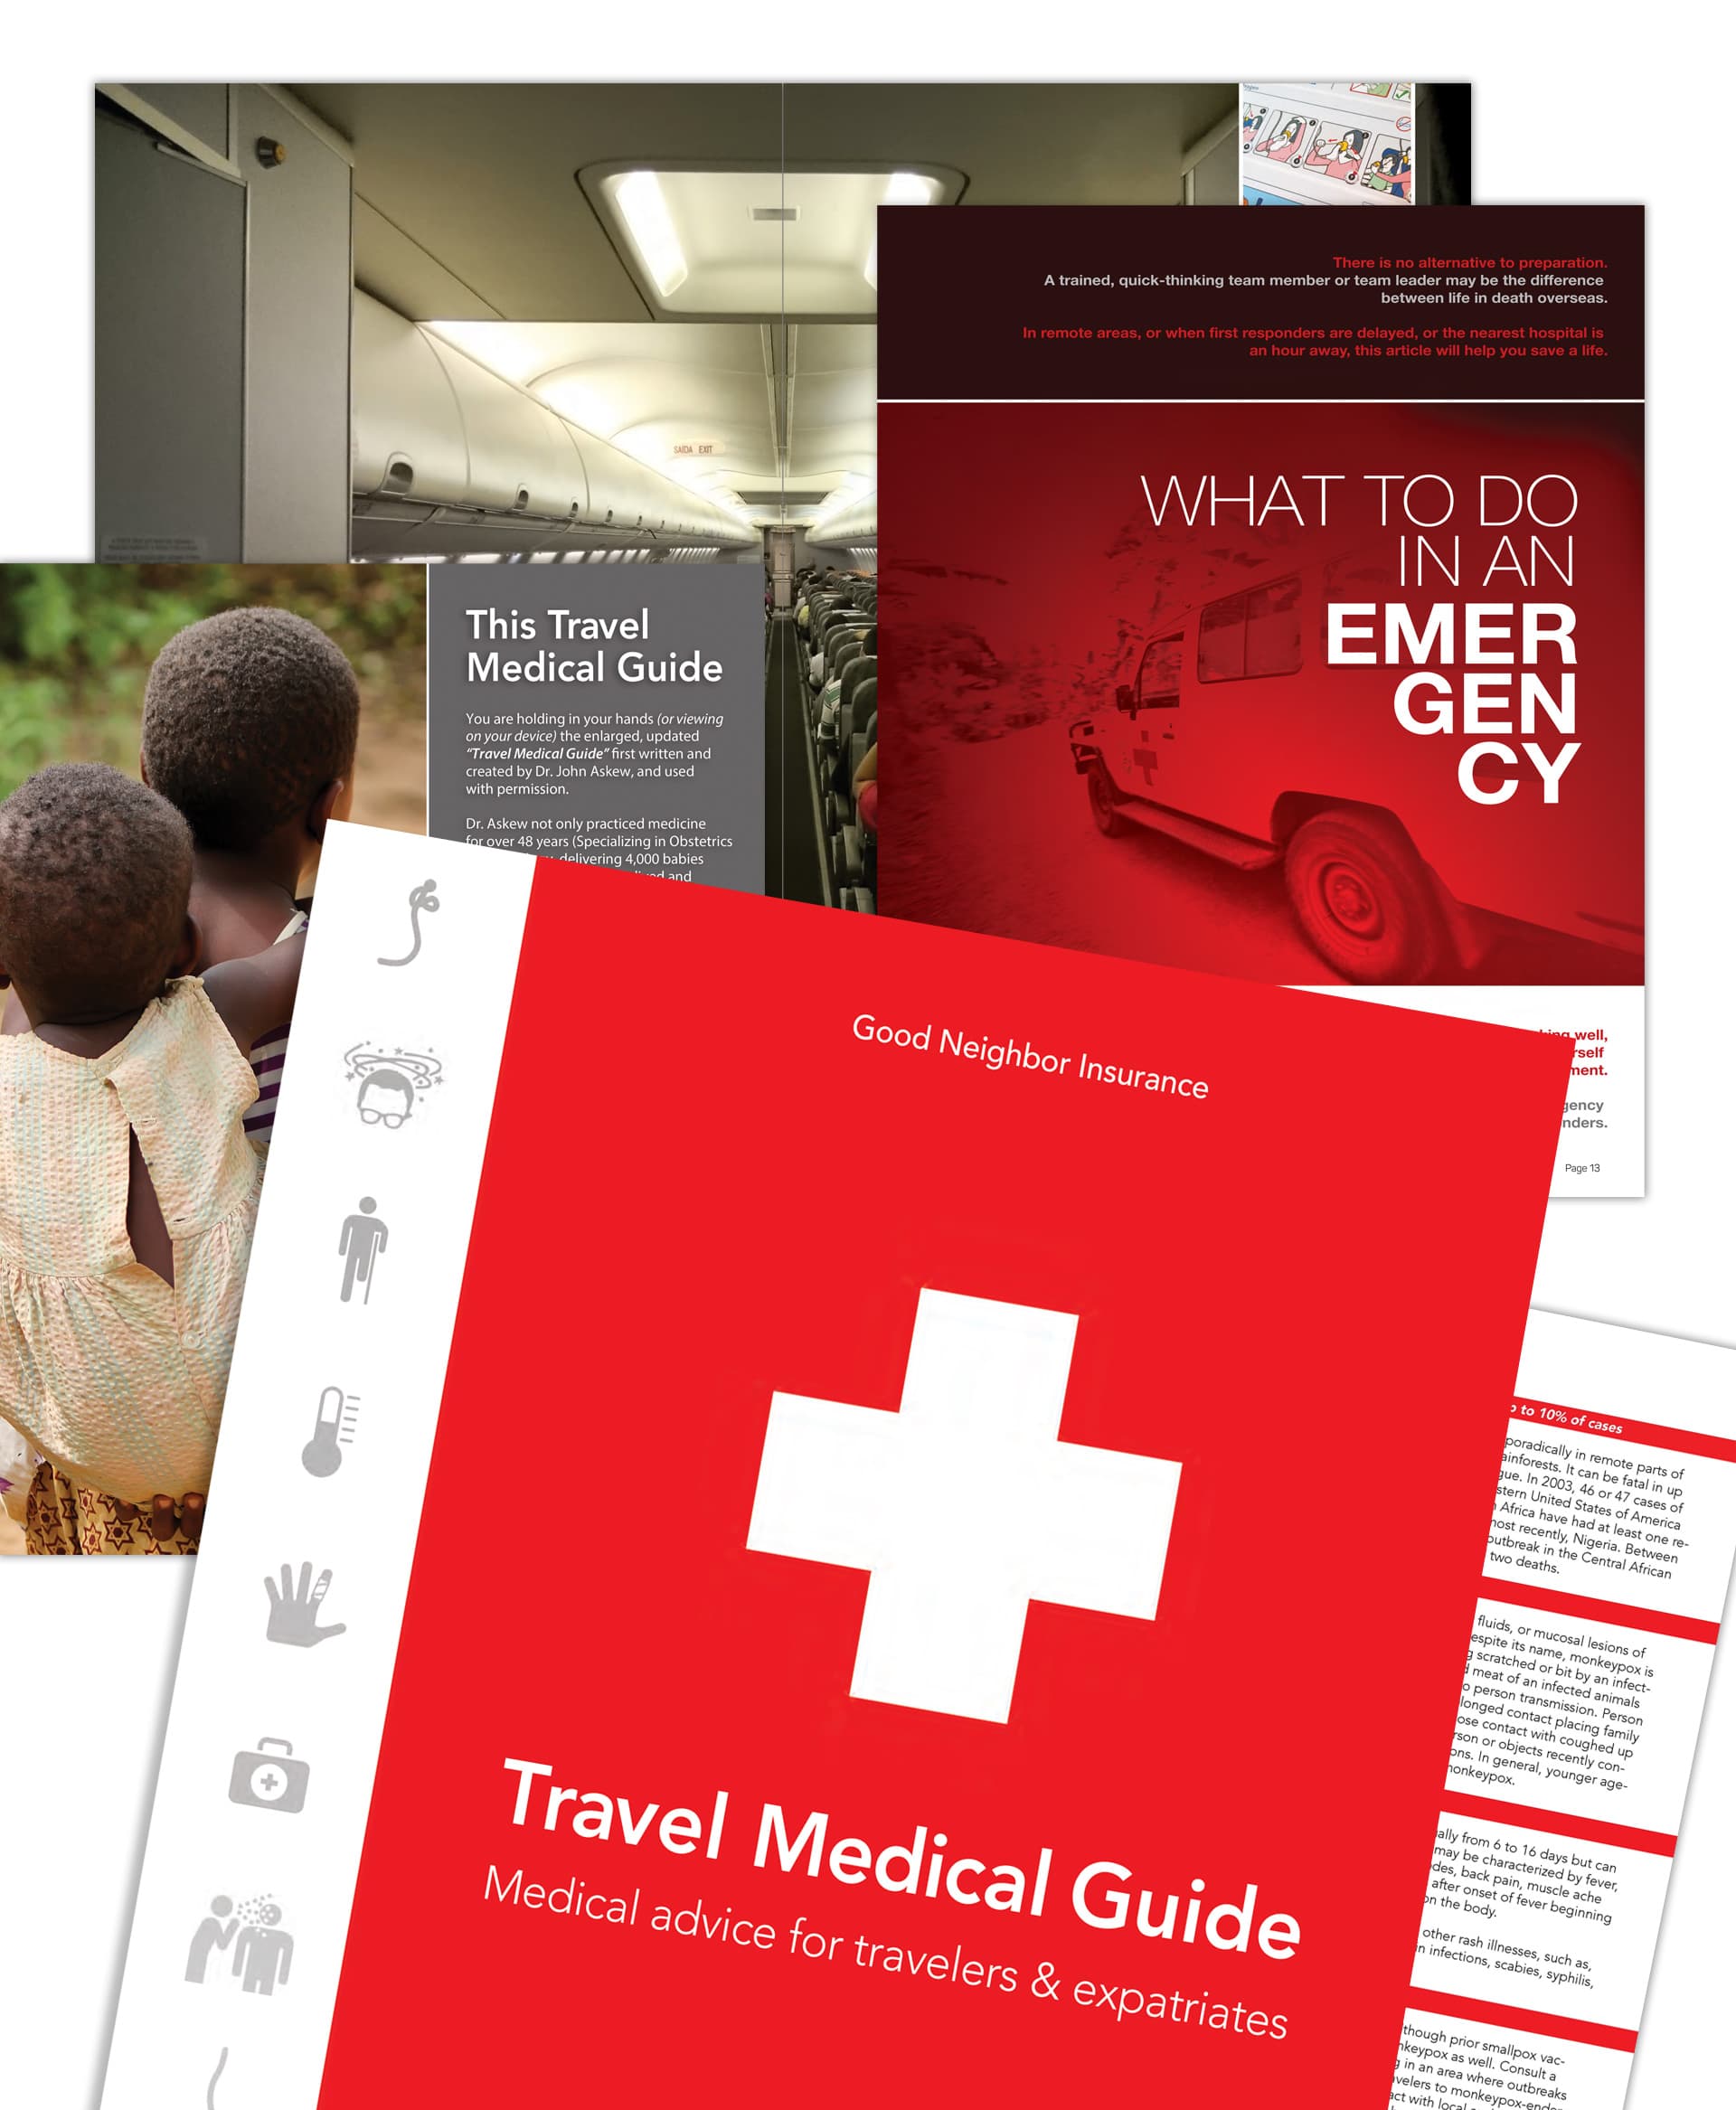 Free Travel Medical Guide from www.gninsurance.com